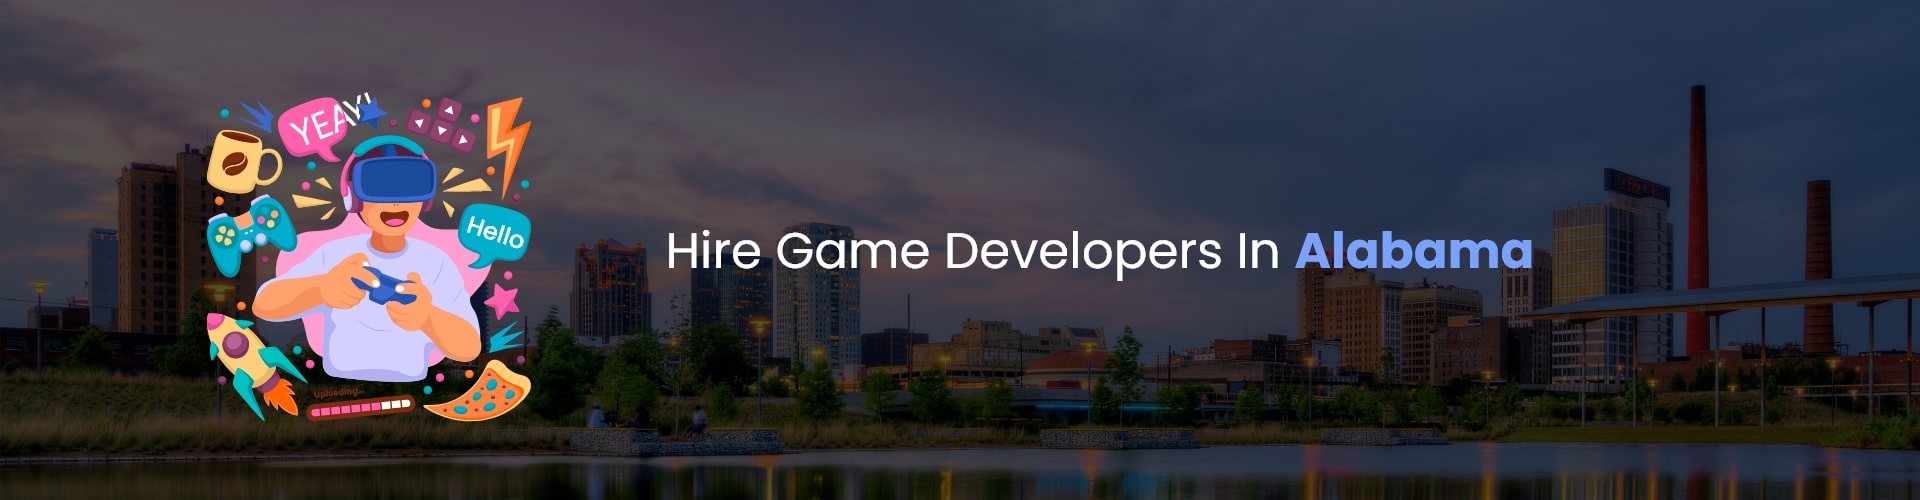 hire game developers in alabama